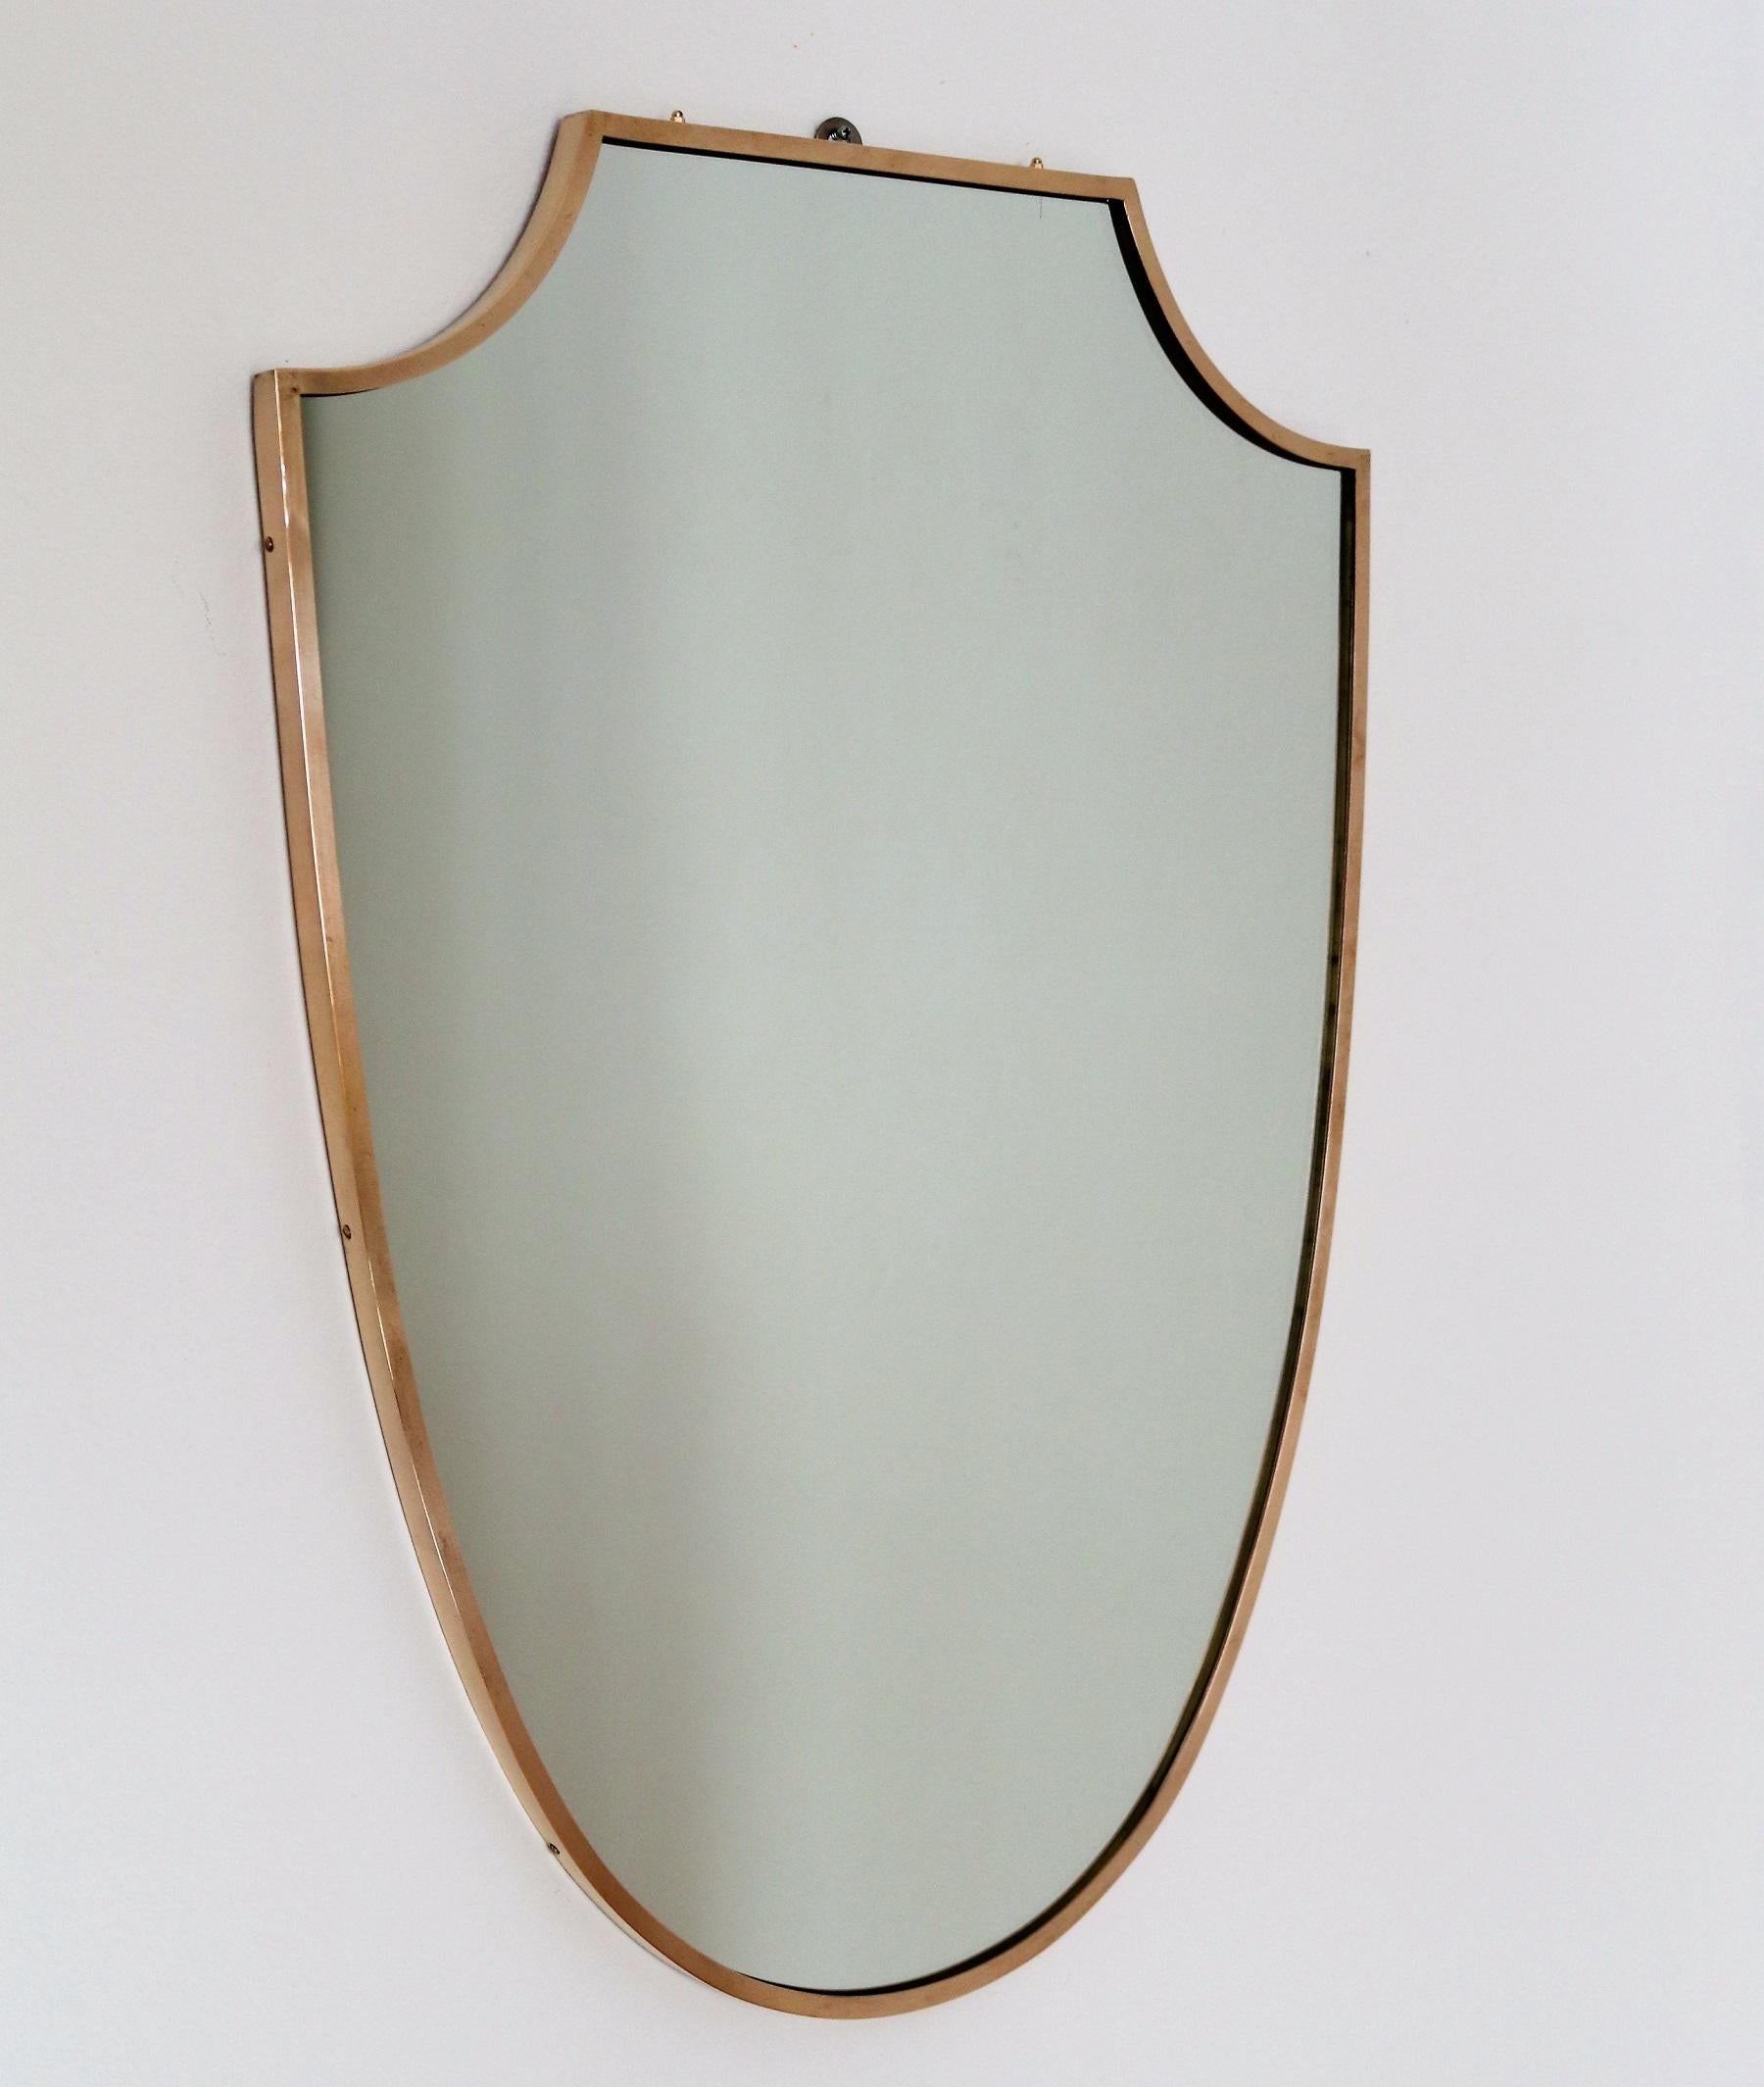 Mid-20th Century Italian Midcentury Shield Wall Mirror with Brass Frame, 1950s